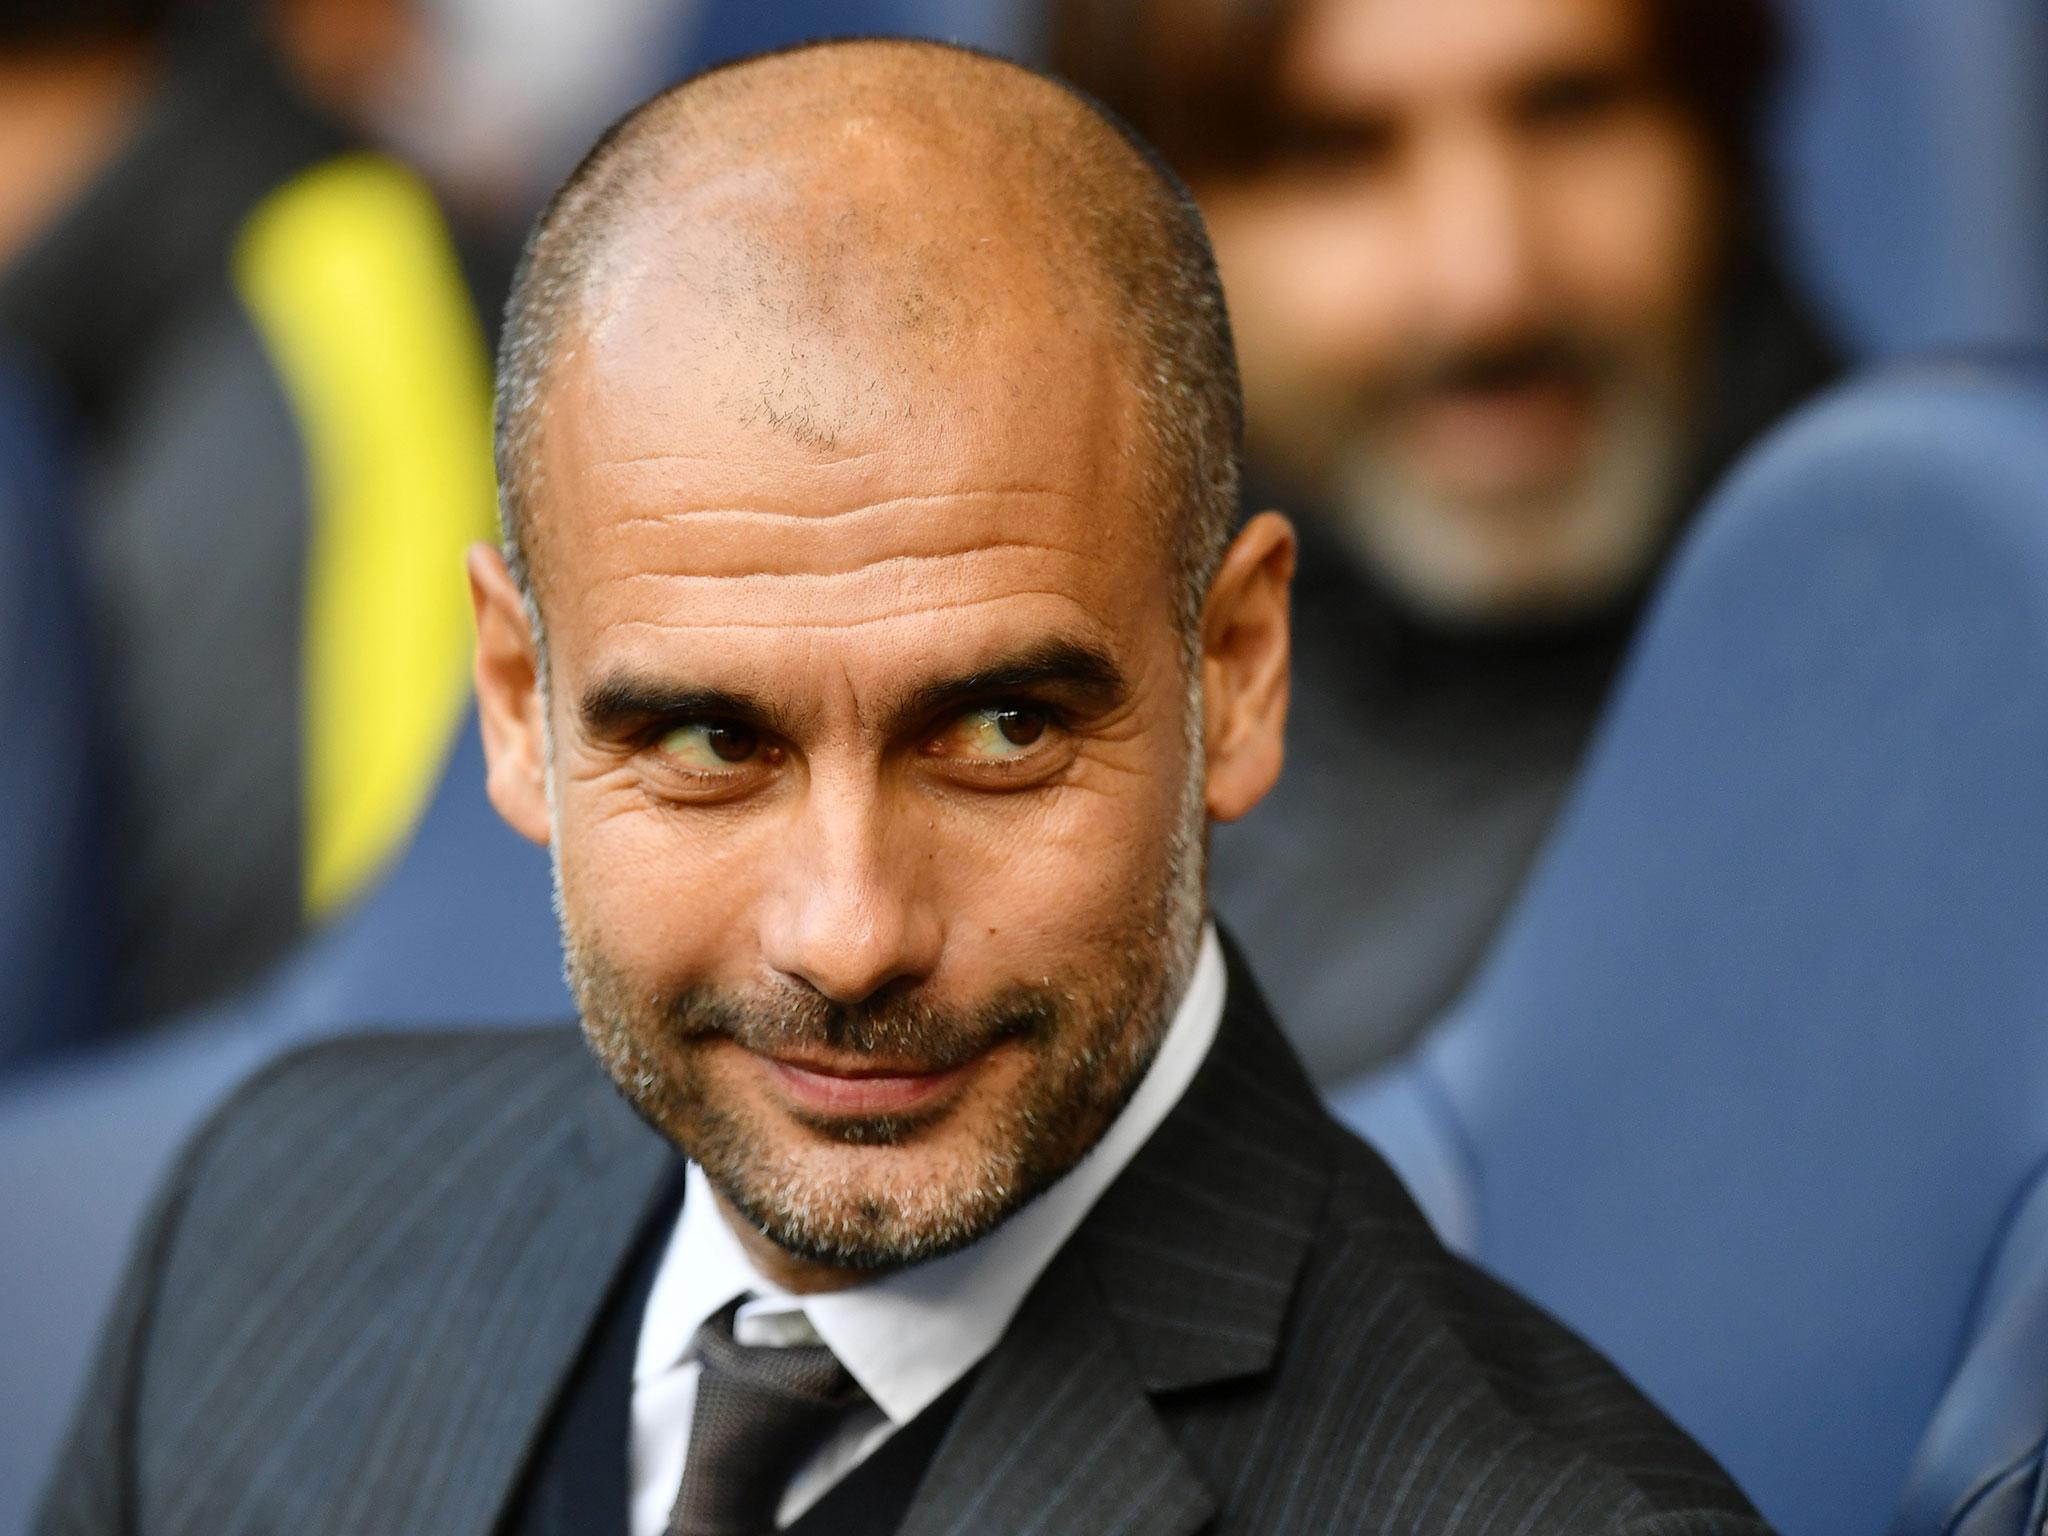 A trip to the Ukraine is the biggest negative for Guardiola